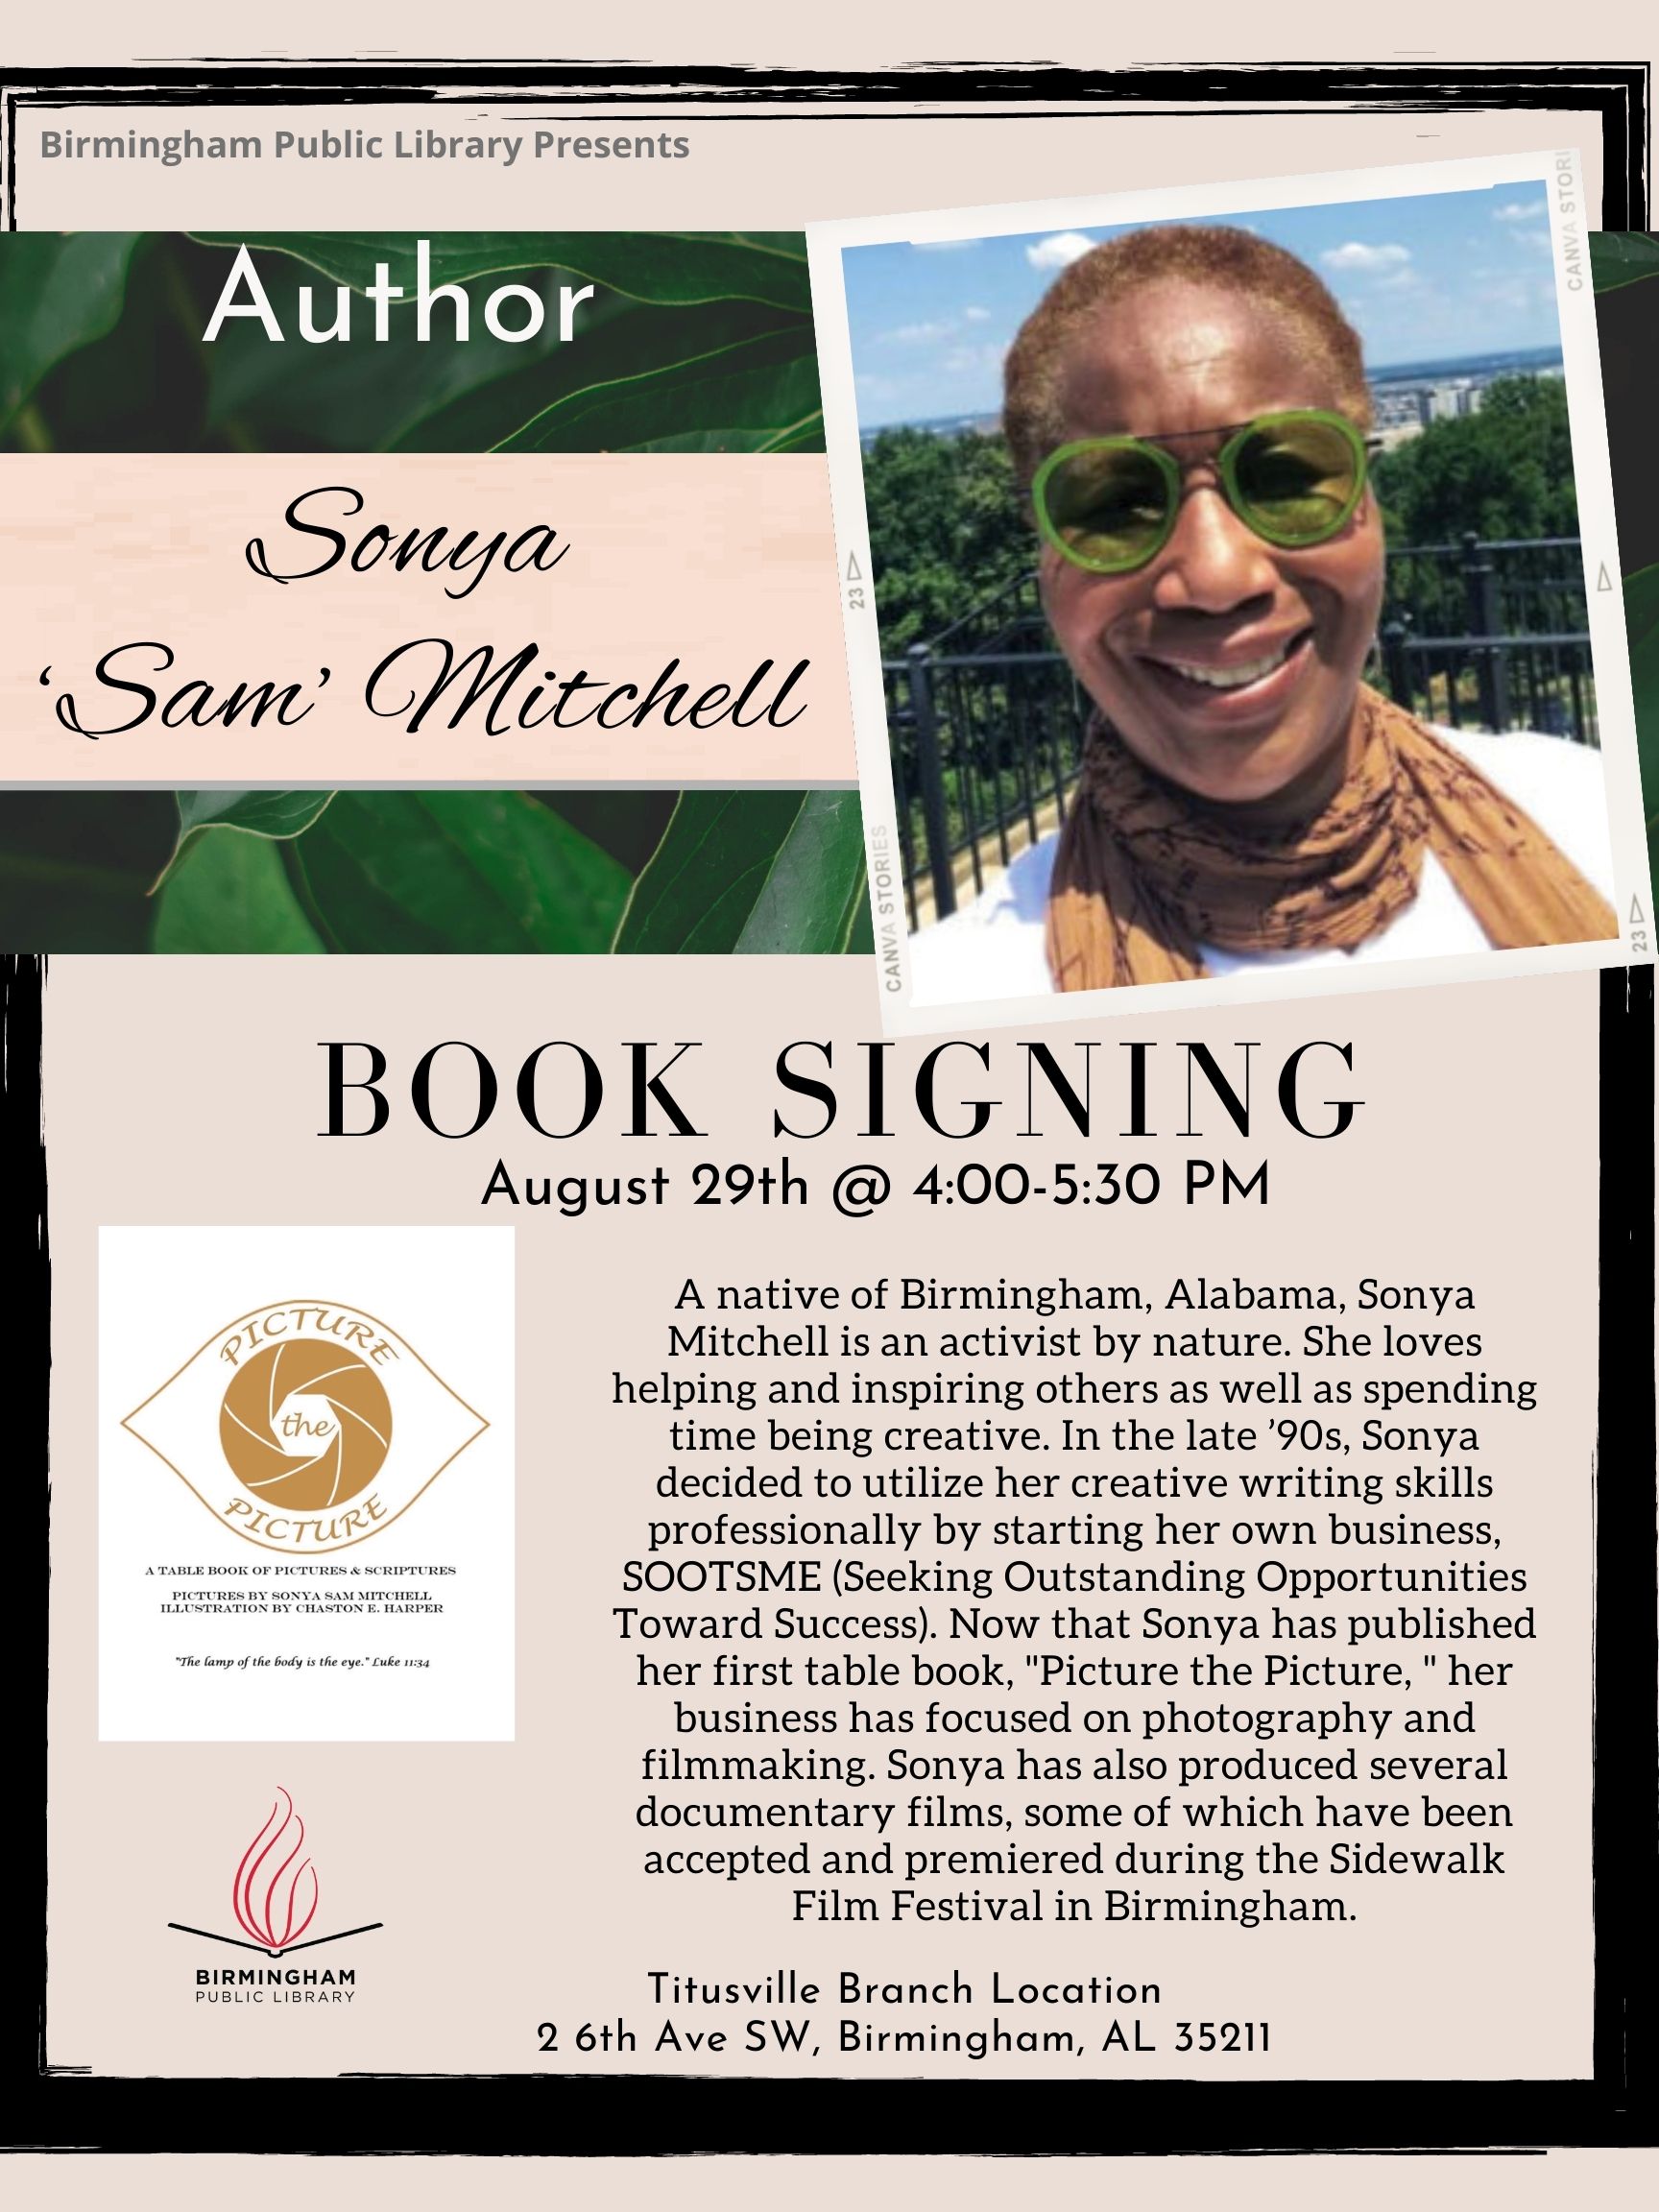 Book Signing with Author Sonya "Sam" Mitchell